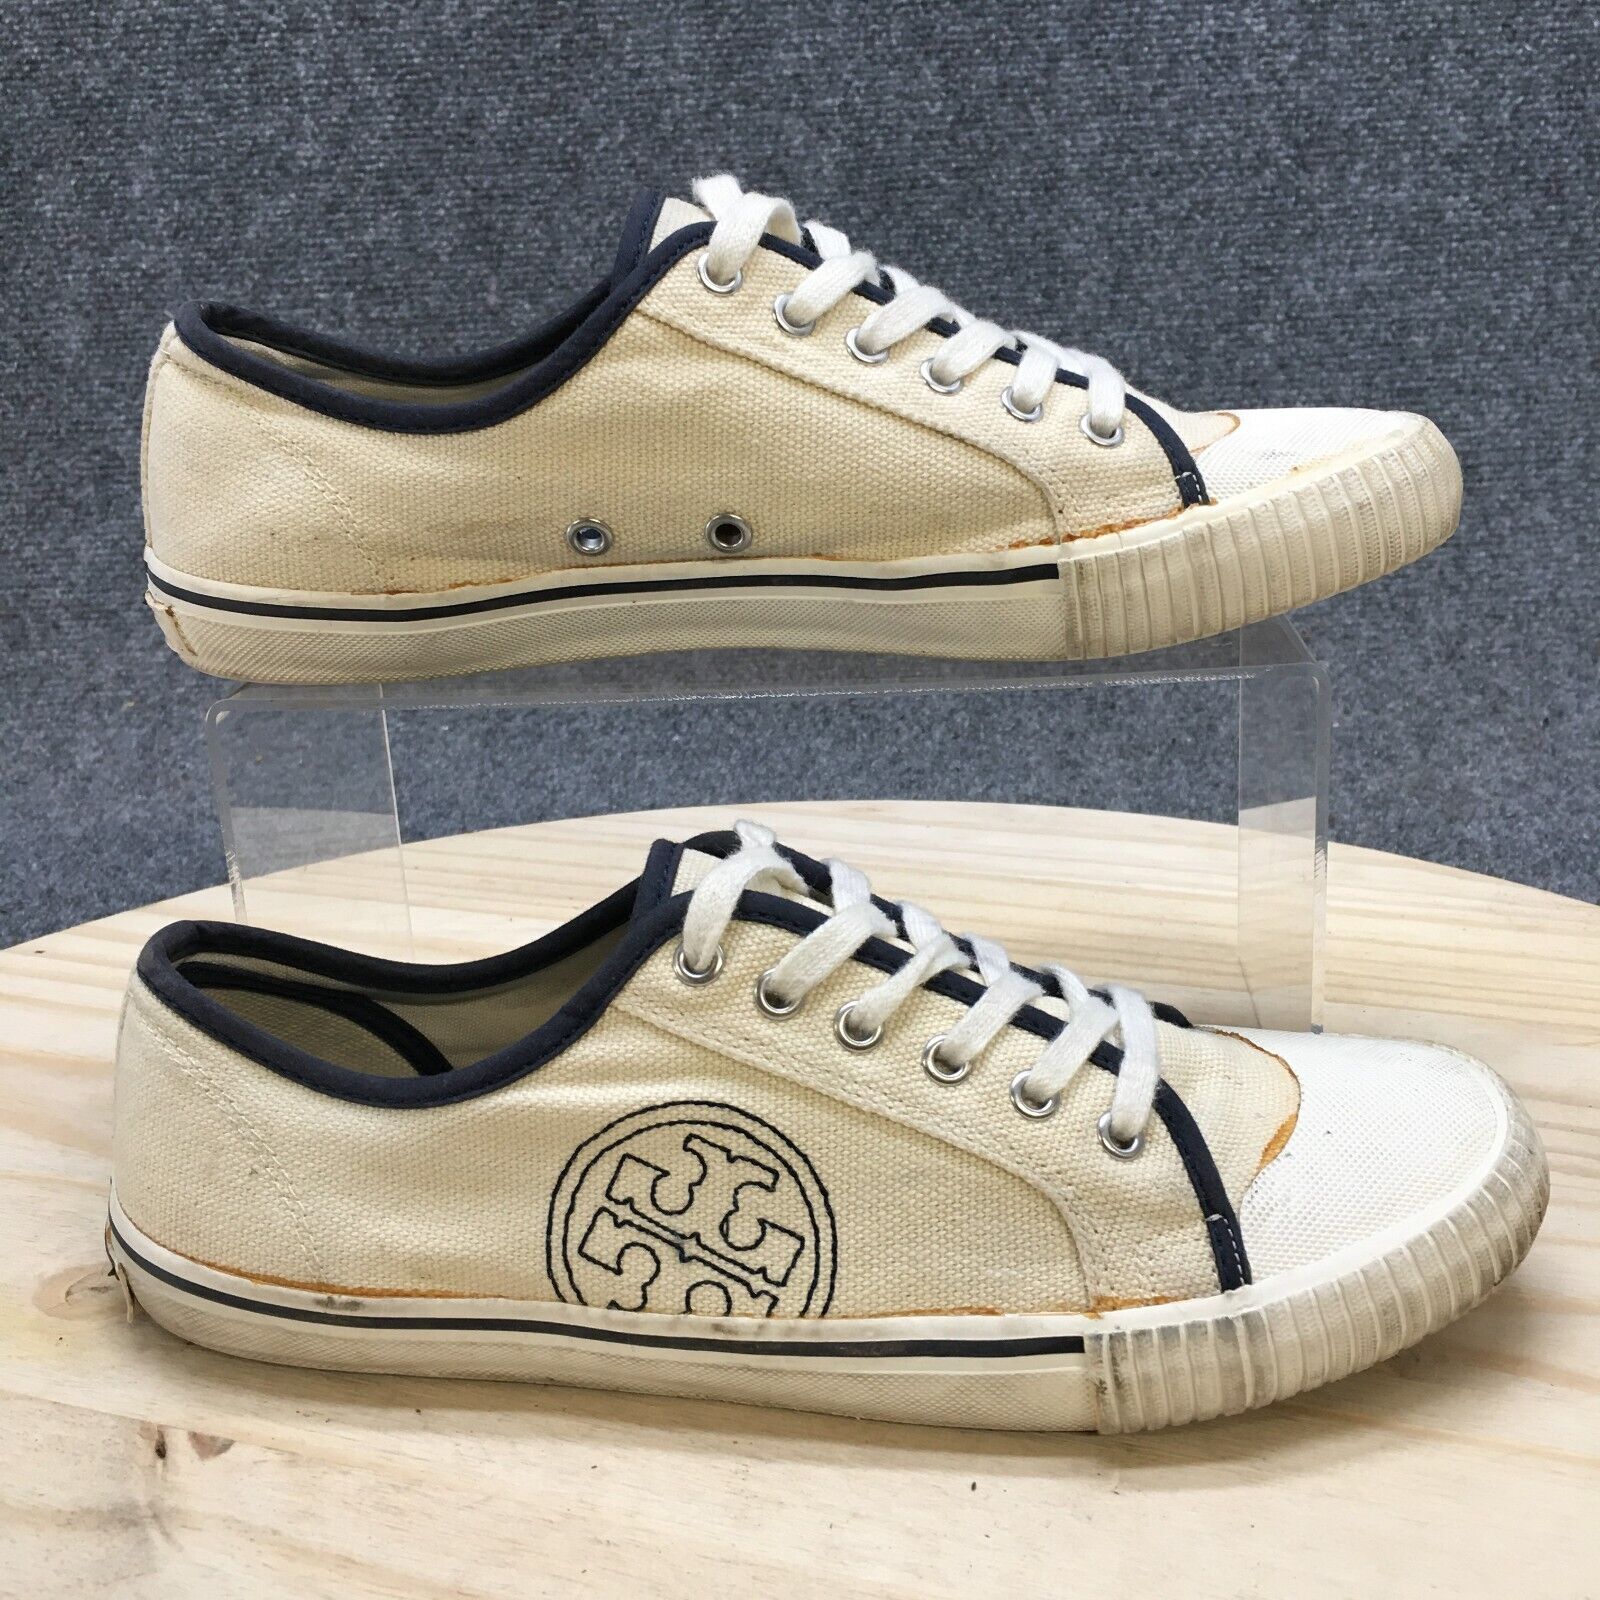 Tory Burch Shoes Womens 9 M Casual Sneakers Beige Canvas Comfort Lace Up  LowTop | eBay